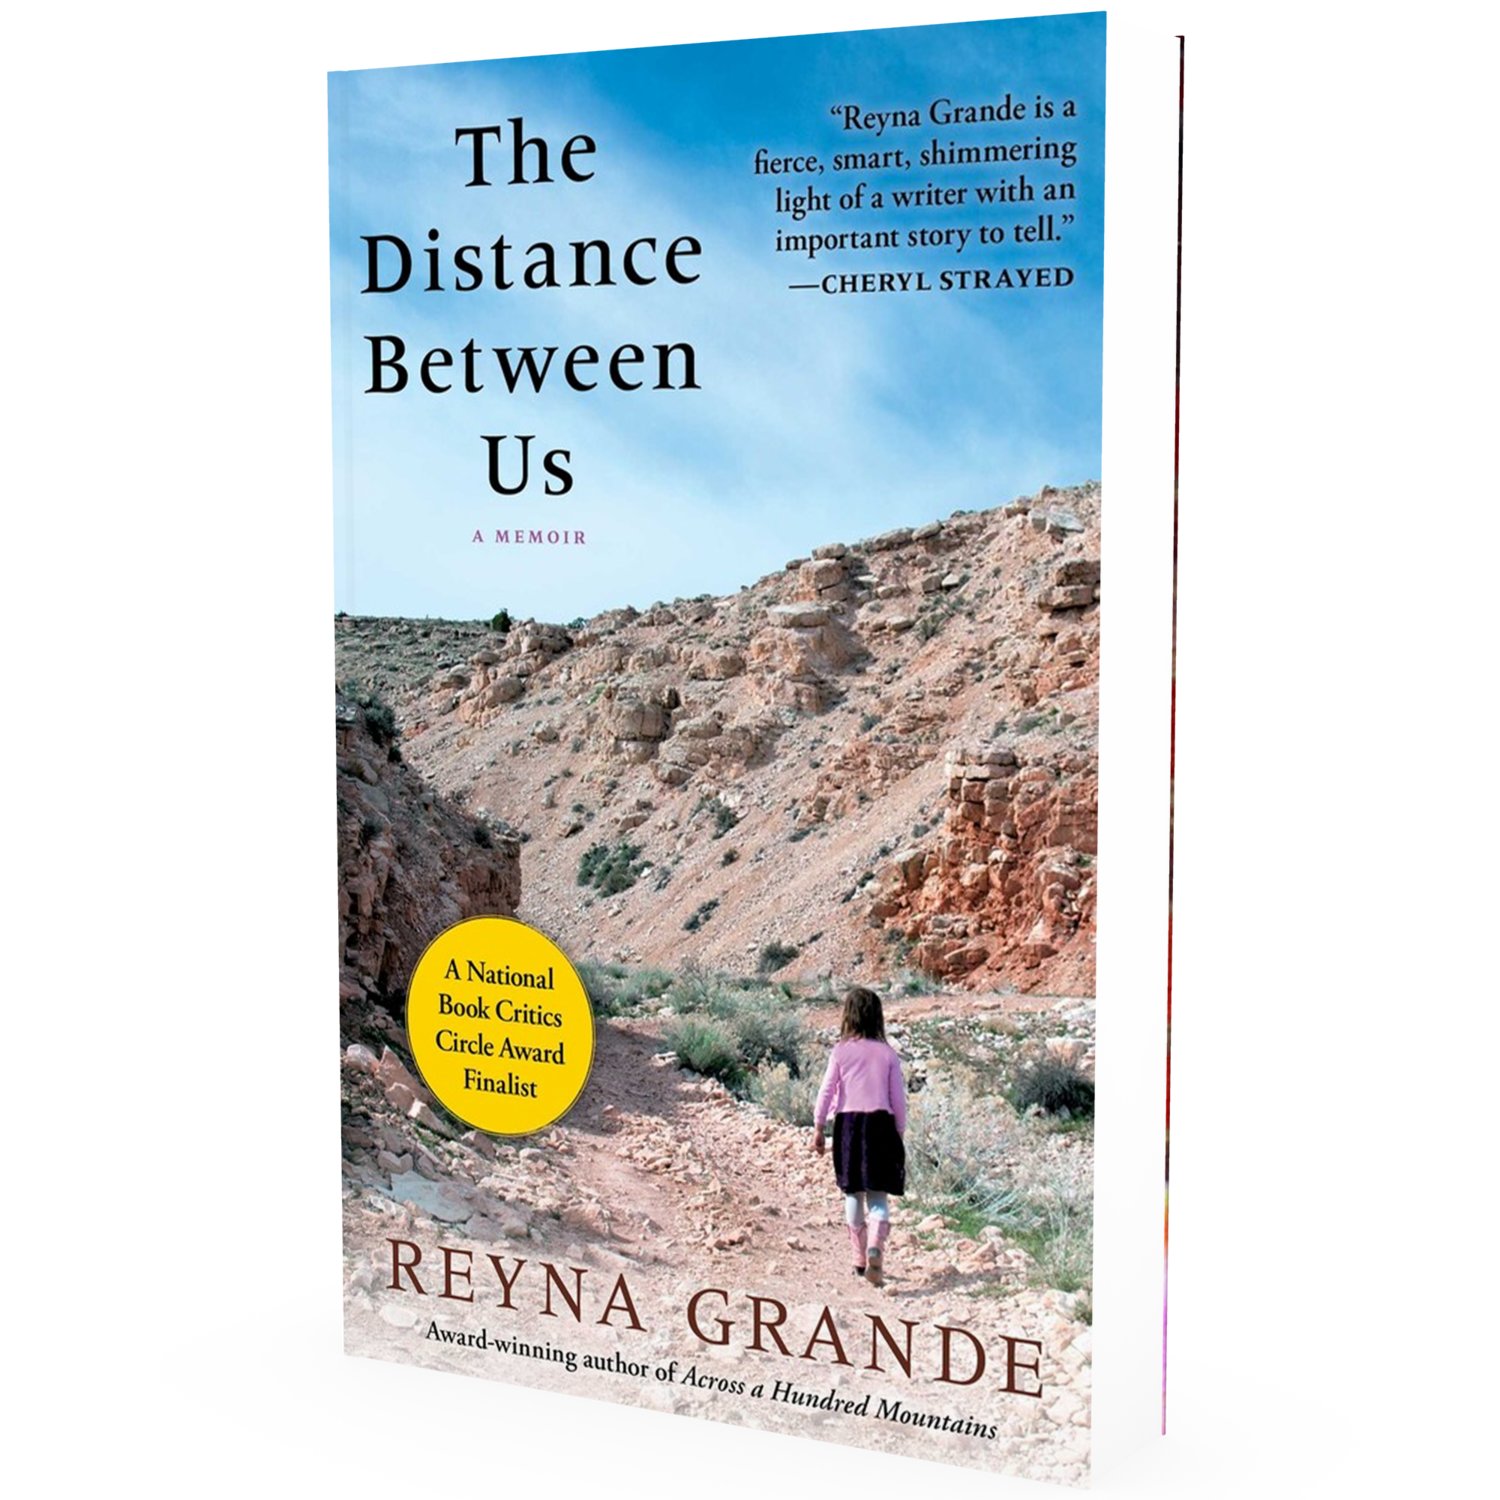 "The Distance Between Us" by Reyna Grande